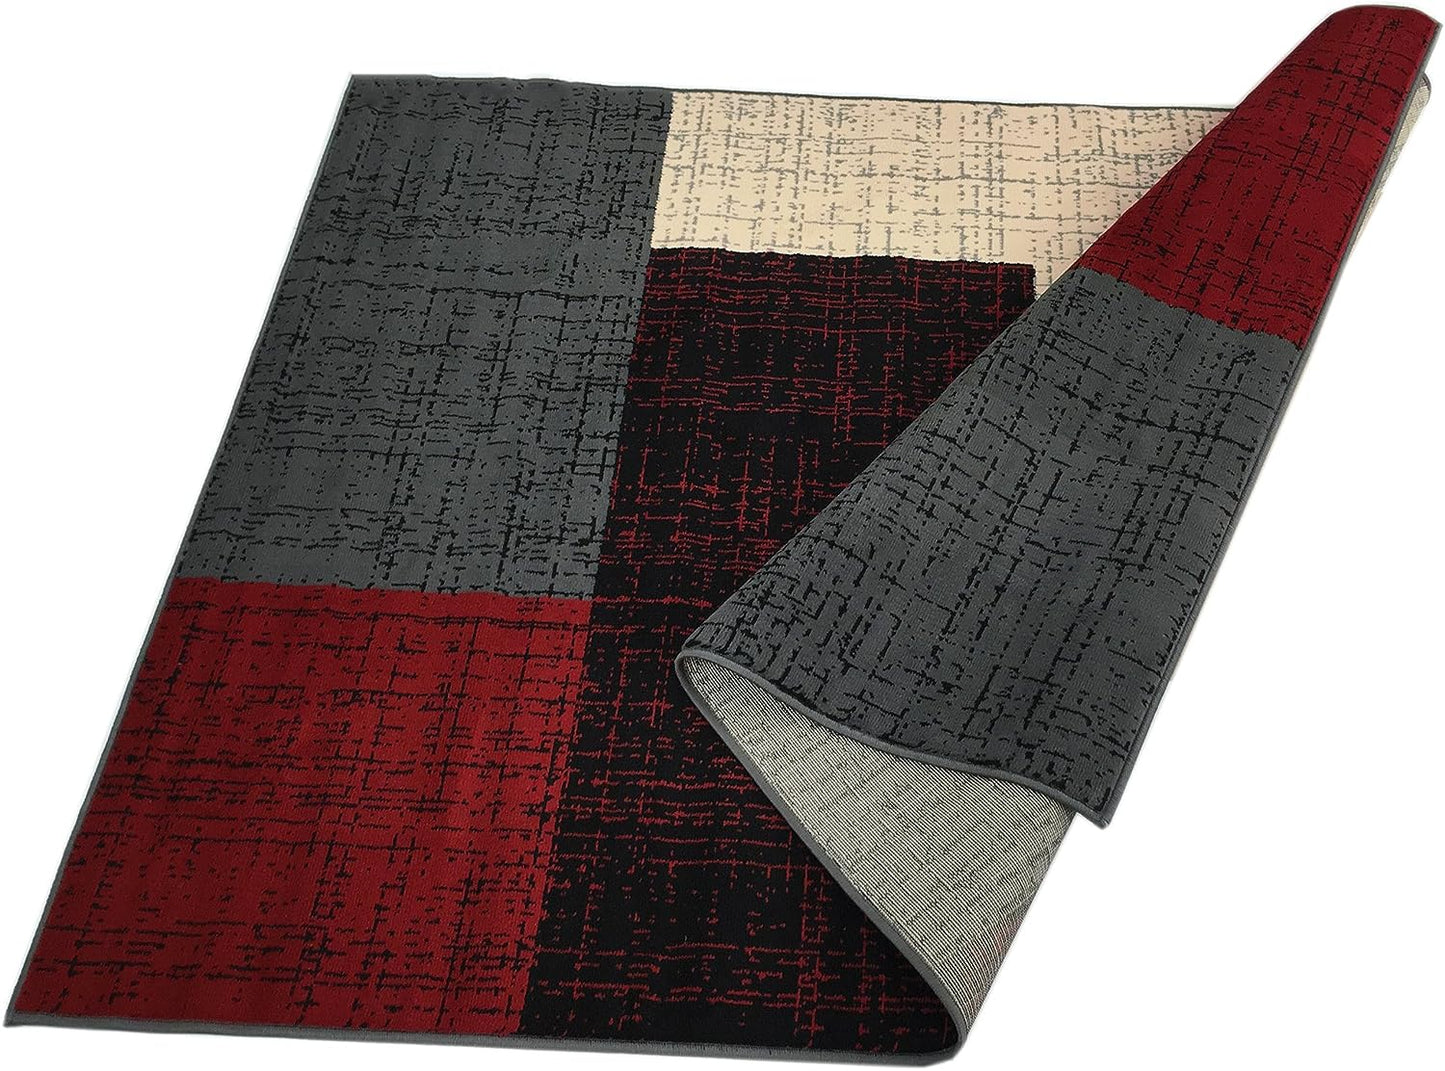 Conur Collection Squares Geometric Abstract Area Rug Rugs Modern Contemporary Area Rug (Red Grey, 4'11" x 6'11")